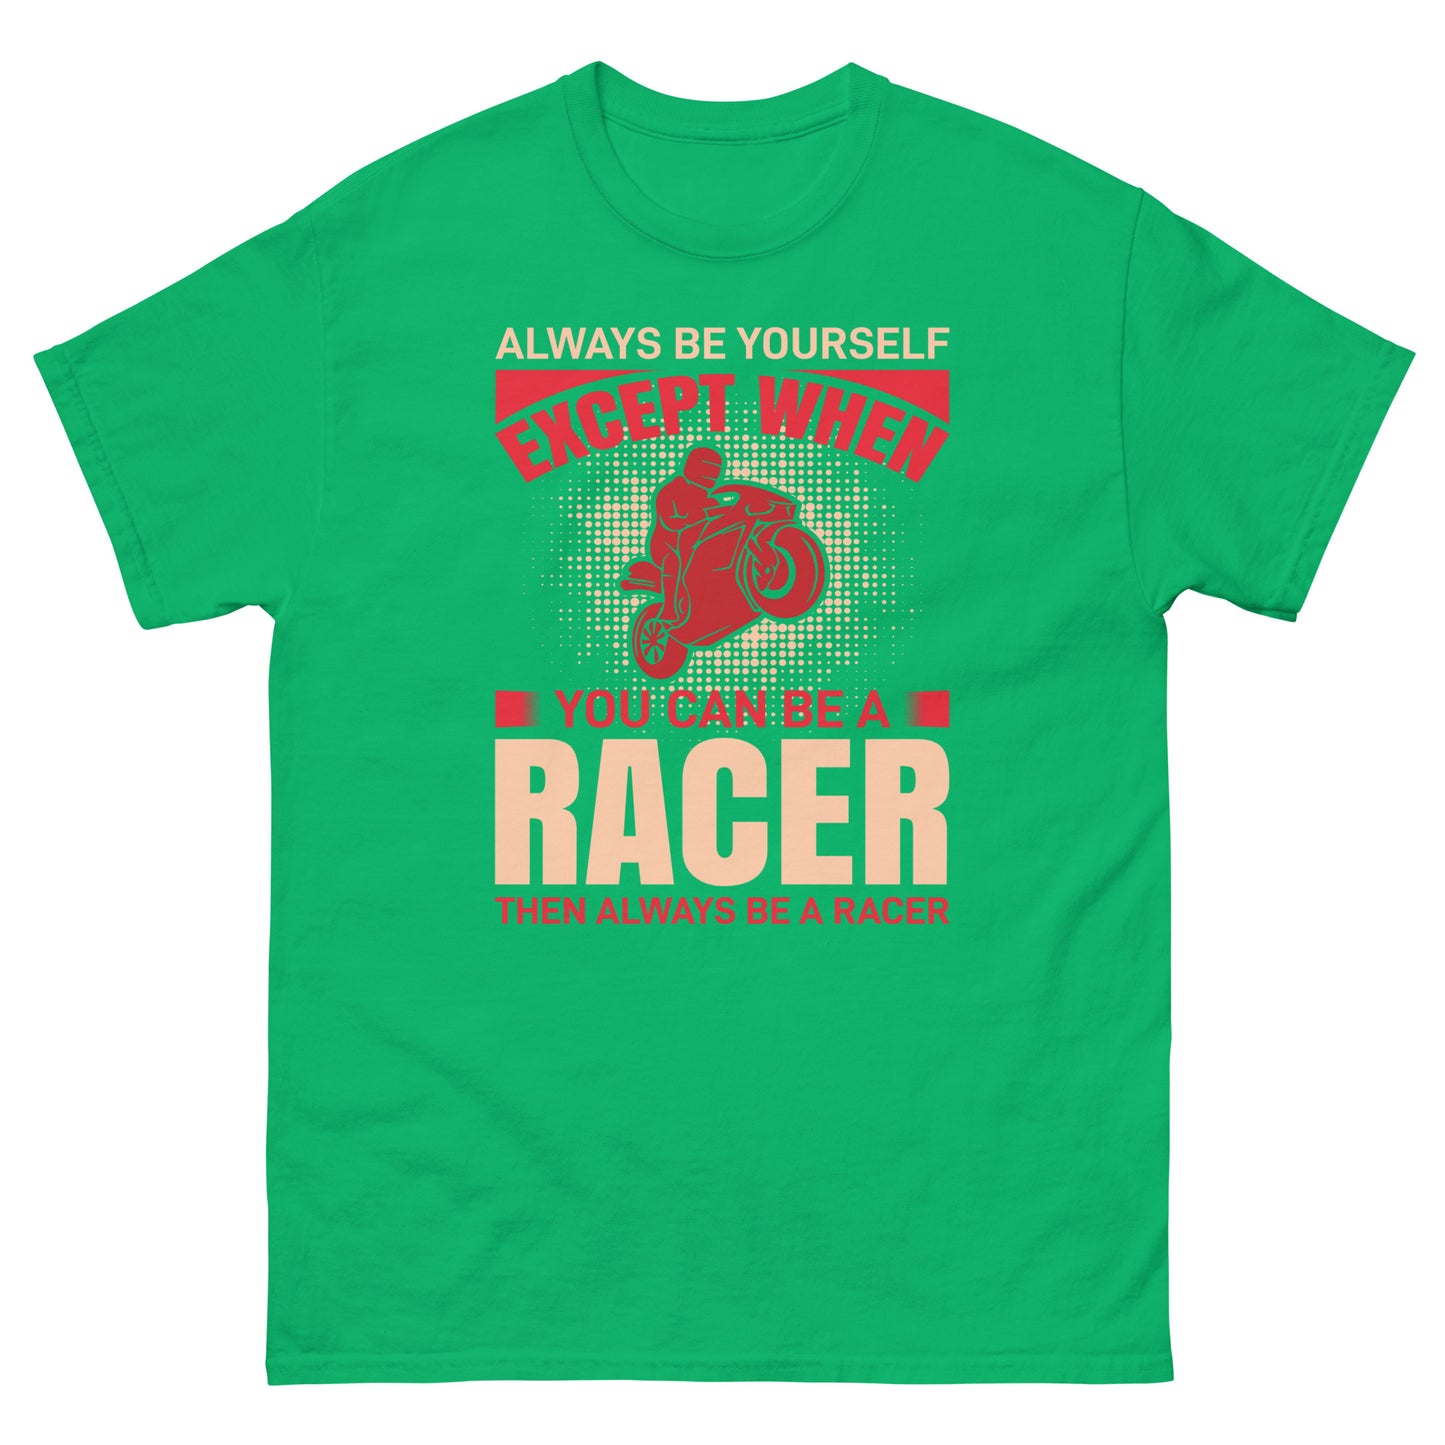 Men's classic tee YOU CAN BE A RACER